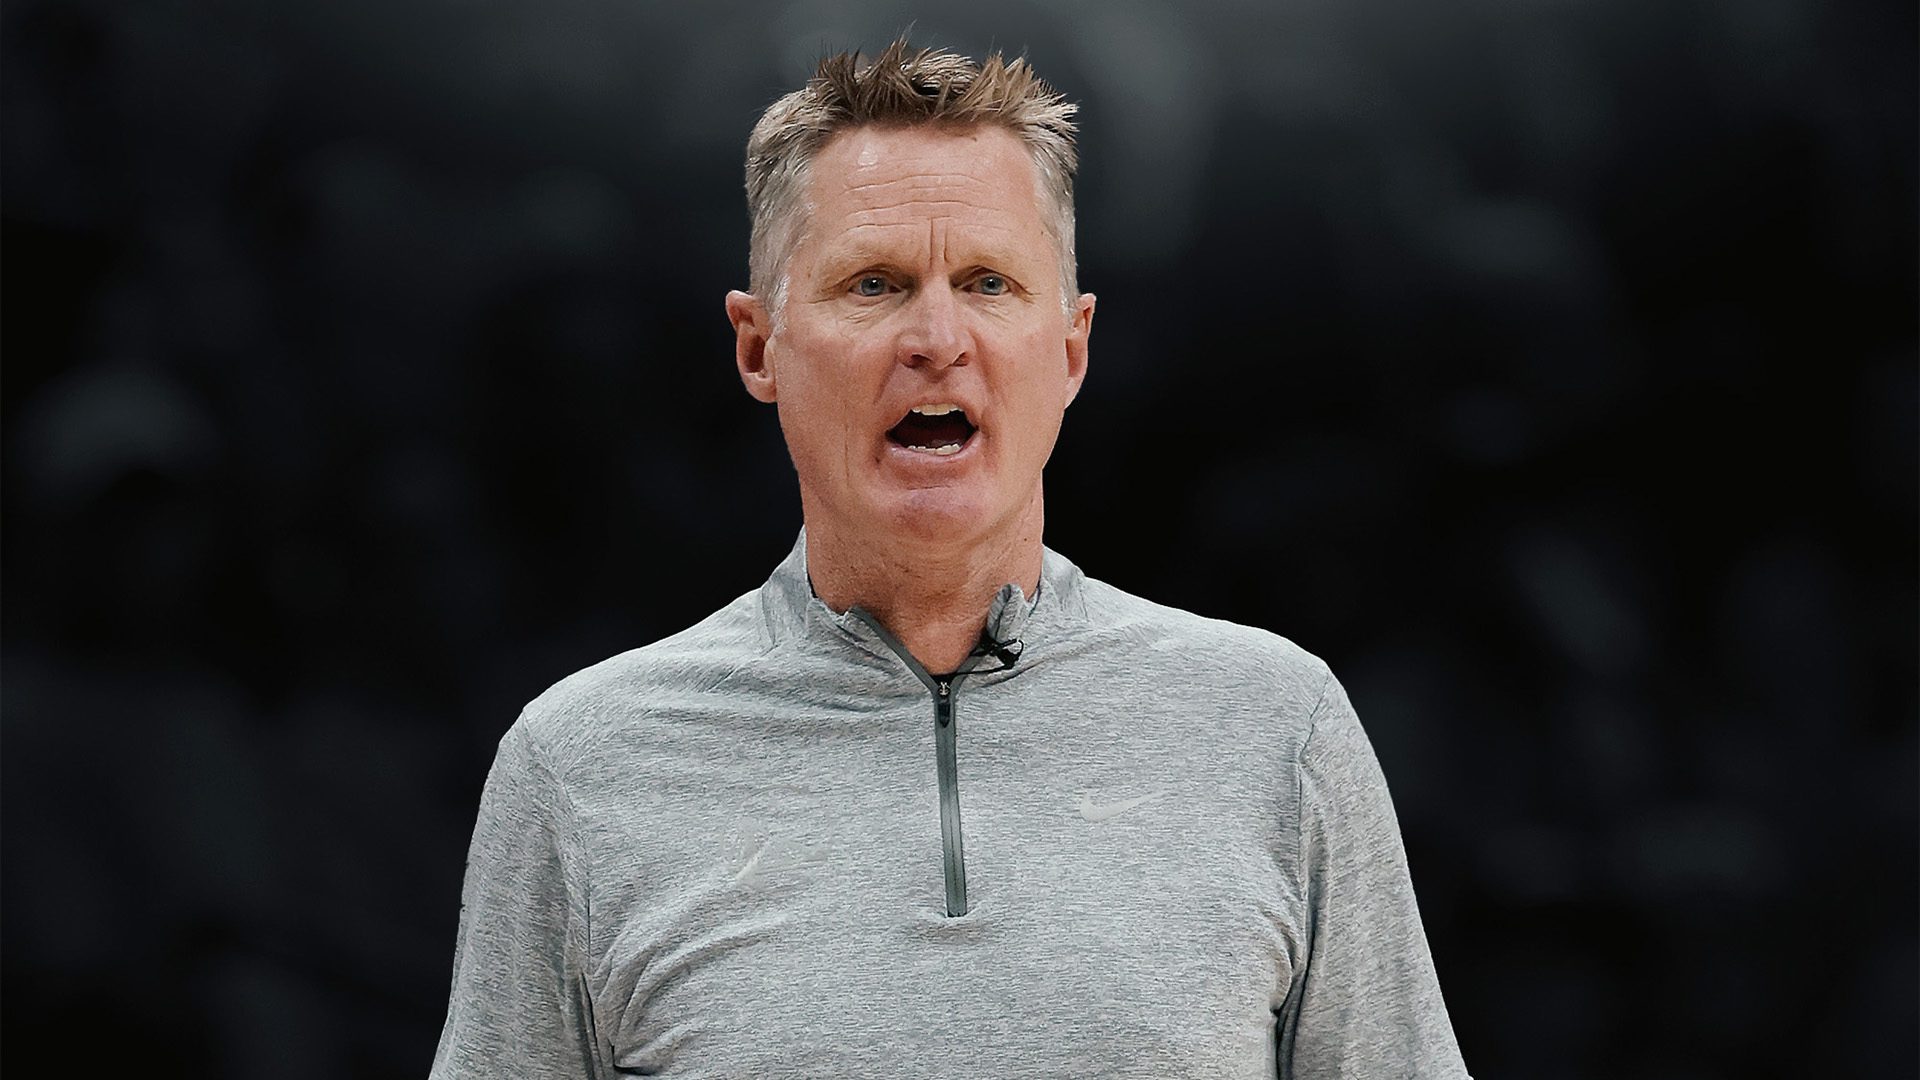 ‘Right Now It’s Just A Pickup Game’: Kerr on Warriors’ Rocky Start